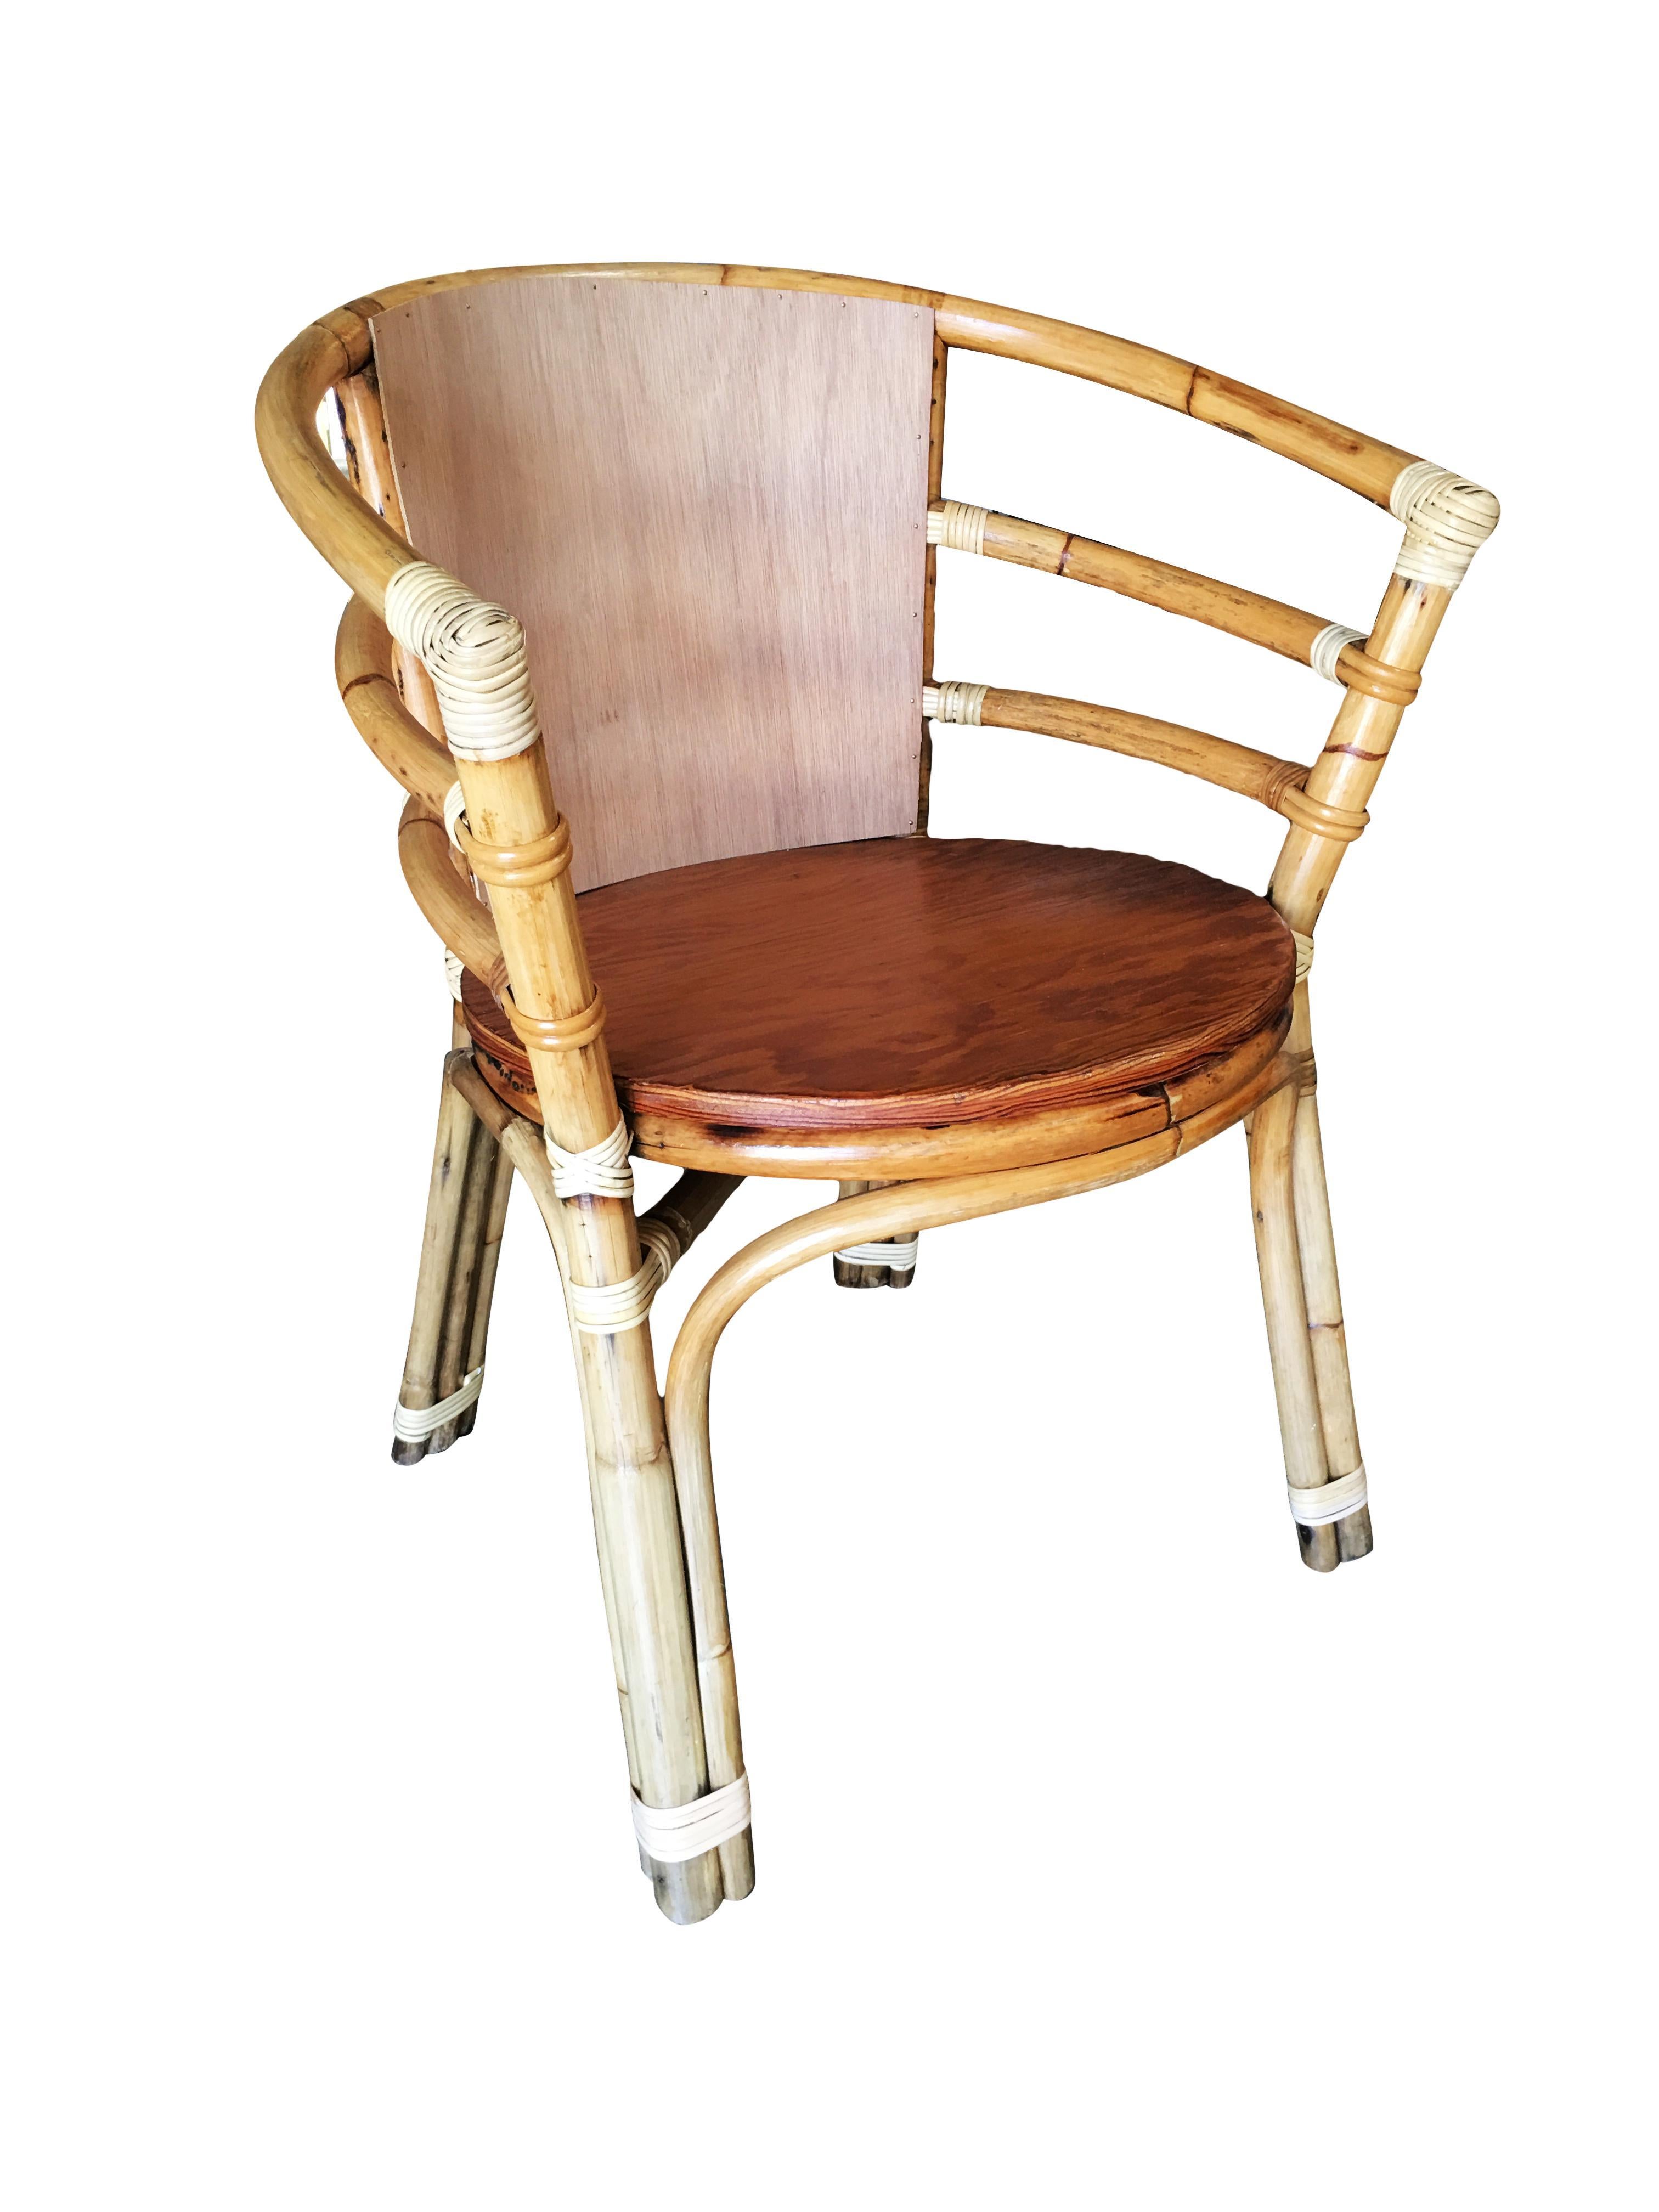 Single strand rattan barrel back armchair with skeleton arms. 
Restored to new for you. All rattan, bamboo and wicker furniture has been painstakingly refurbished to the highest standards with the best materials. All refinishing is done by rattan